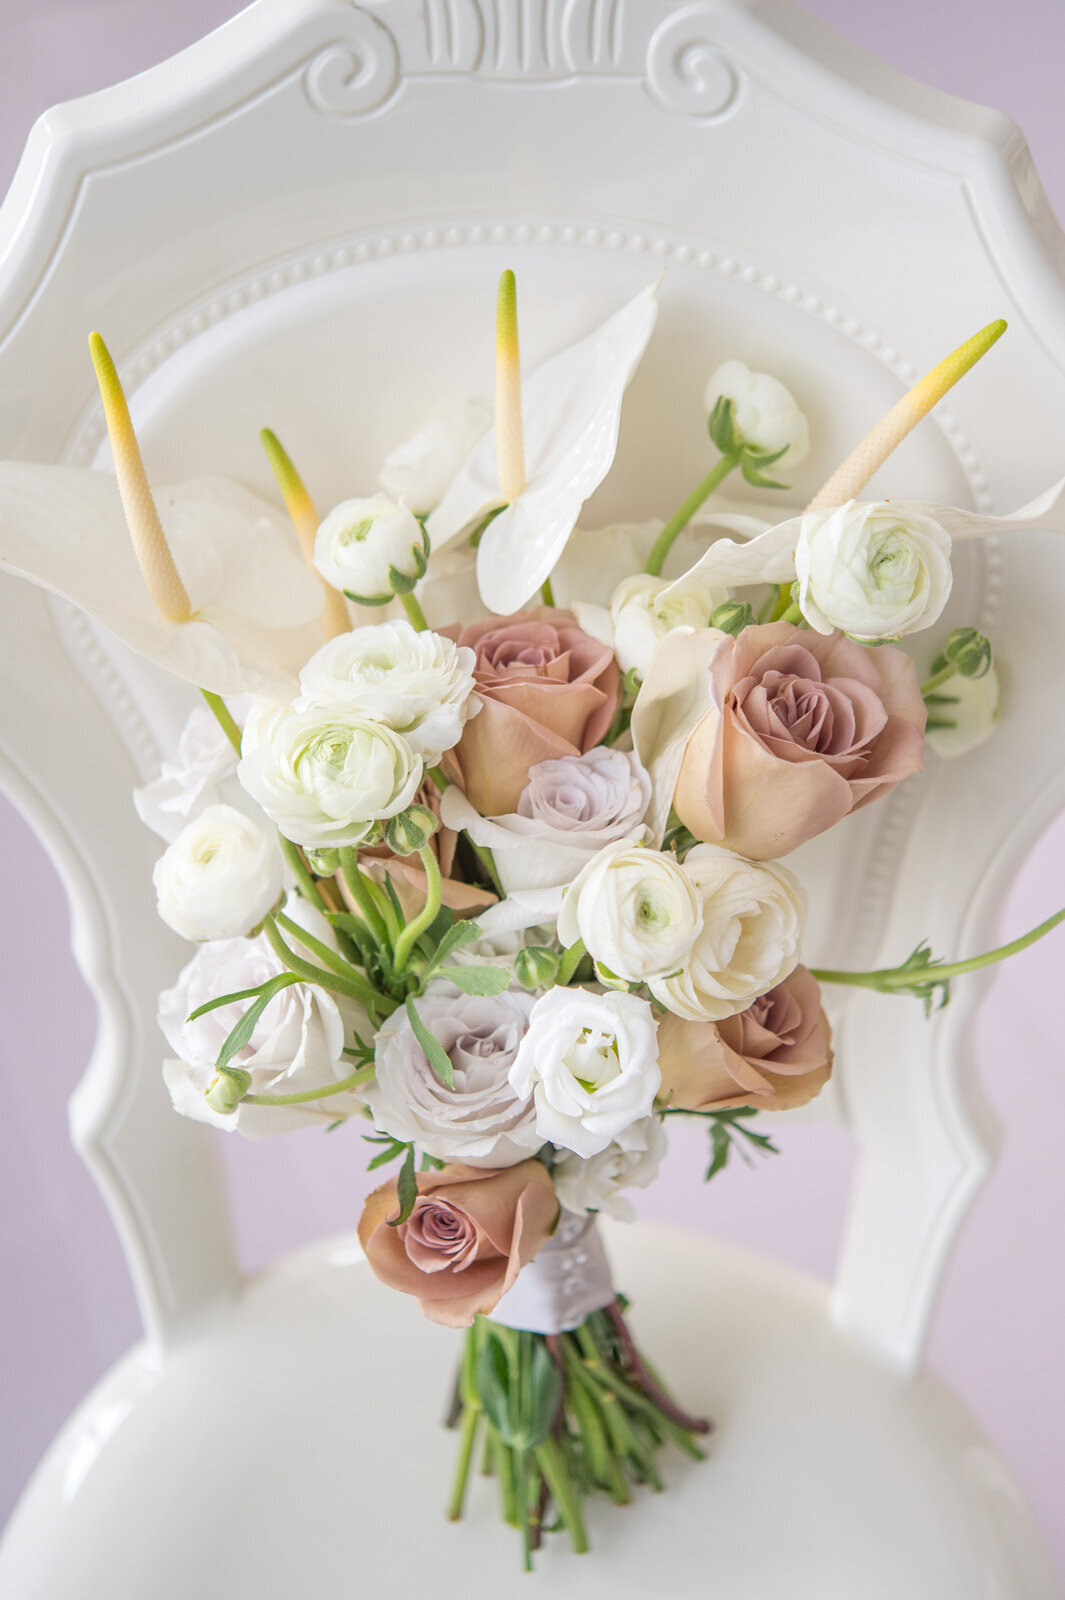 Diana-Pires-Events-Fiore-Wedluxe-10